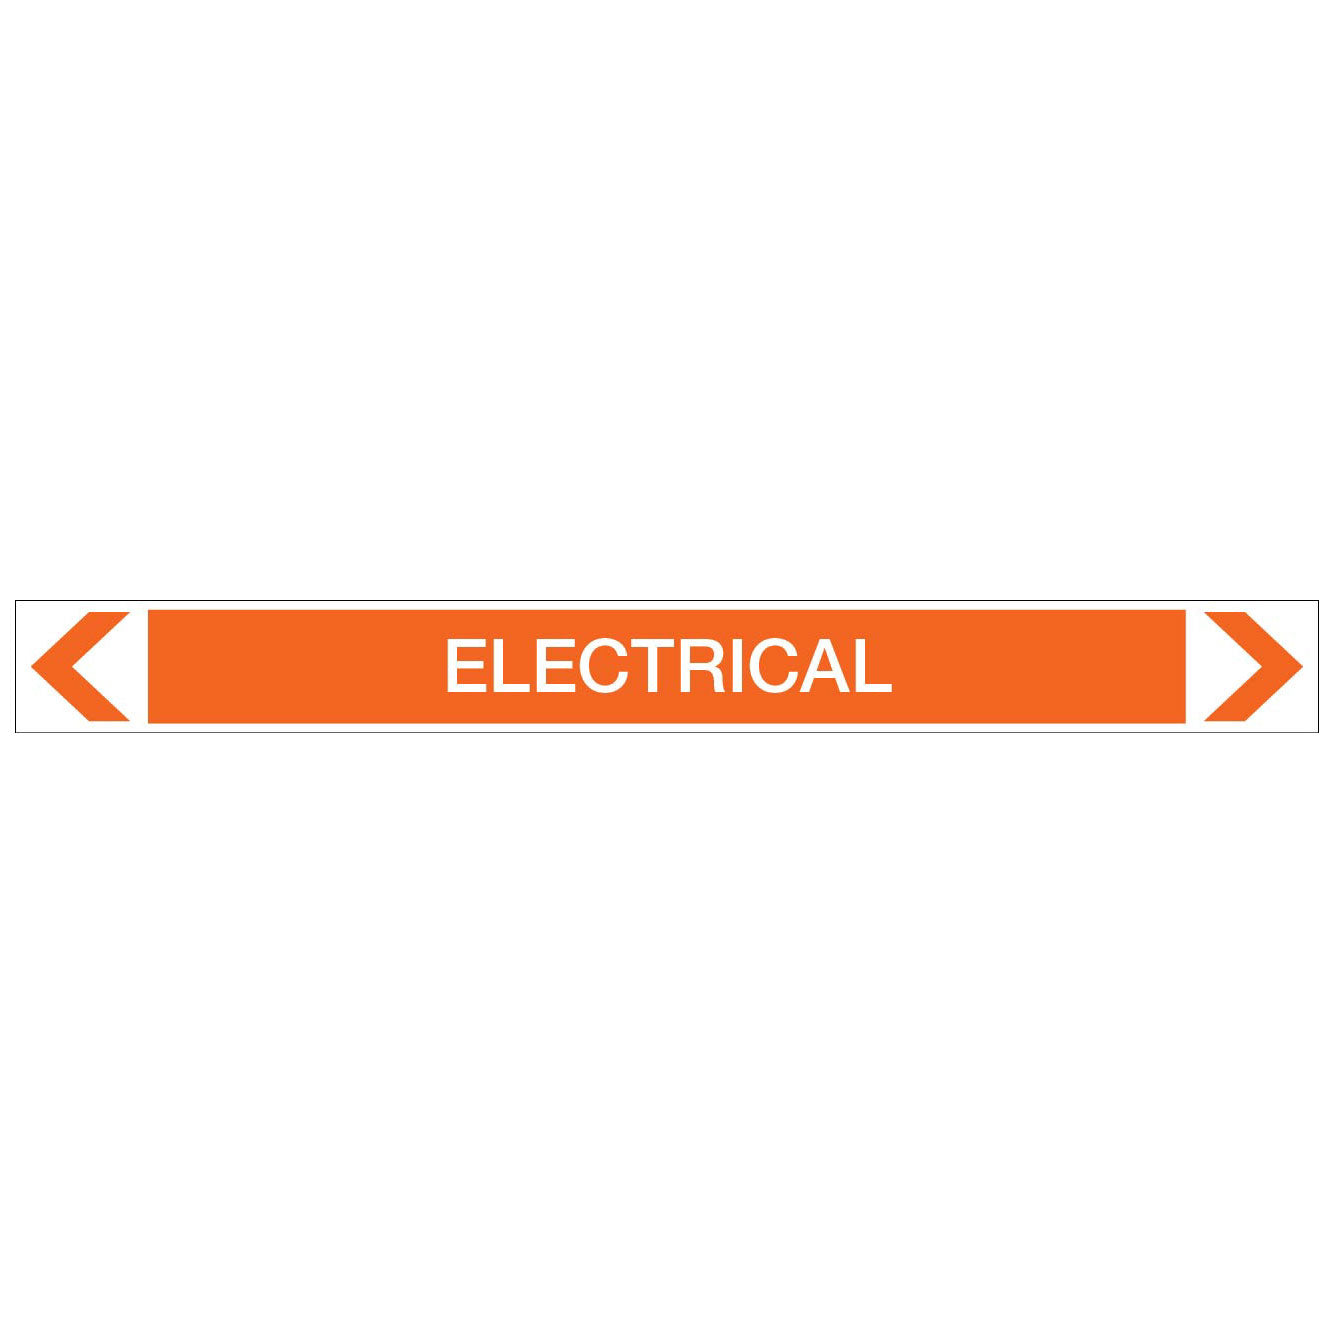 Electrical - Electrical - Pipe Marker Sticker